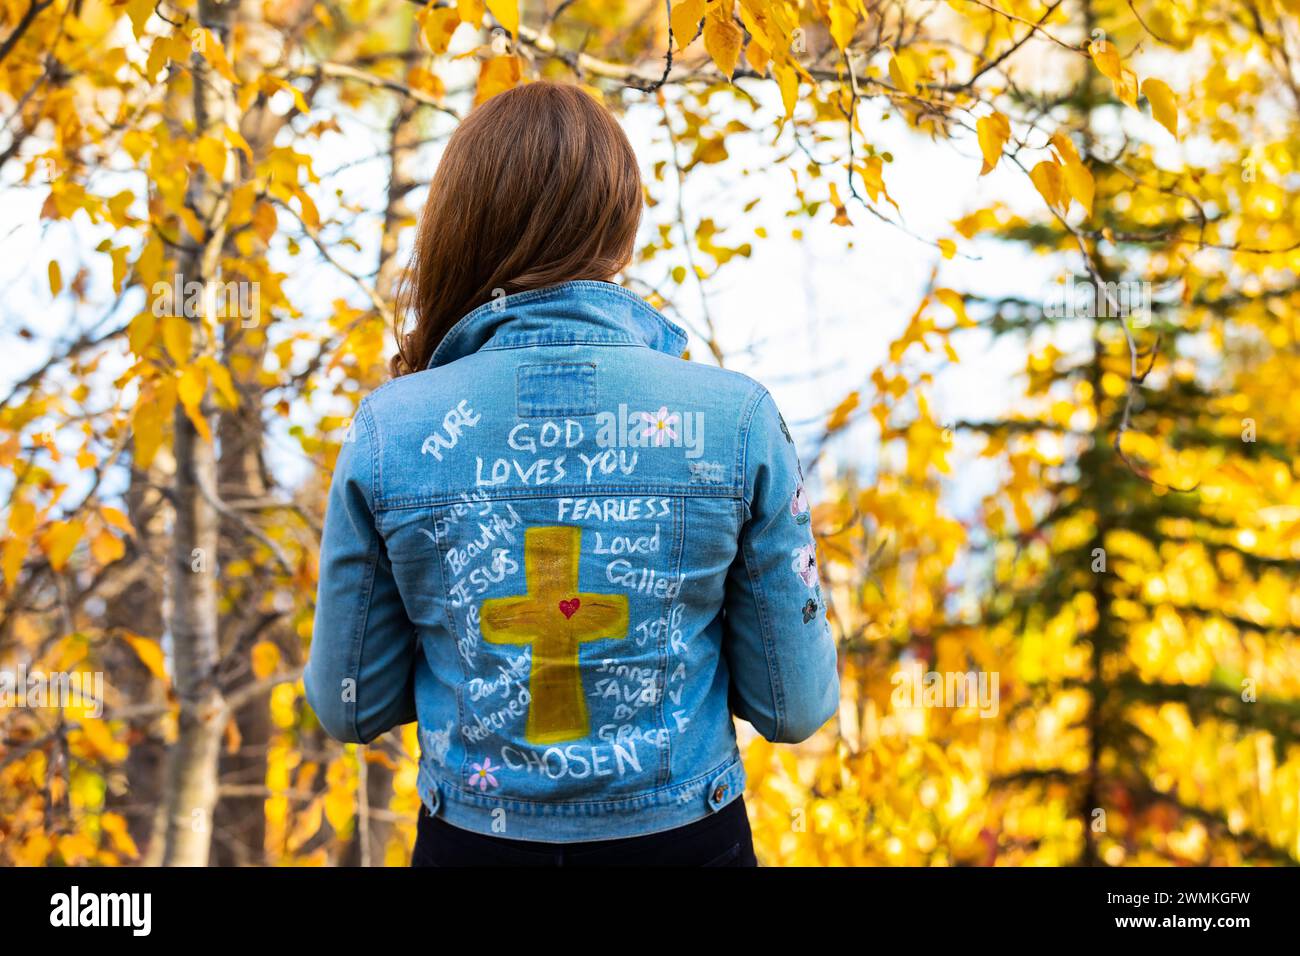 Close-up view from behind of a woman wearing a jean jacket with hand-written Christian references during a fall outing in a city park Stock Photo